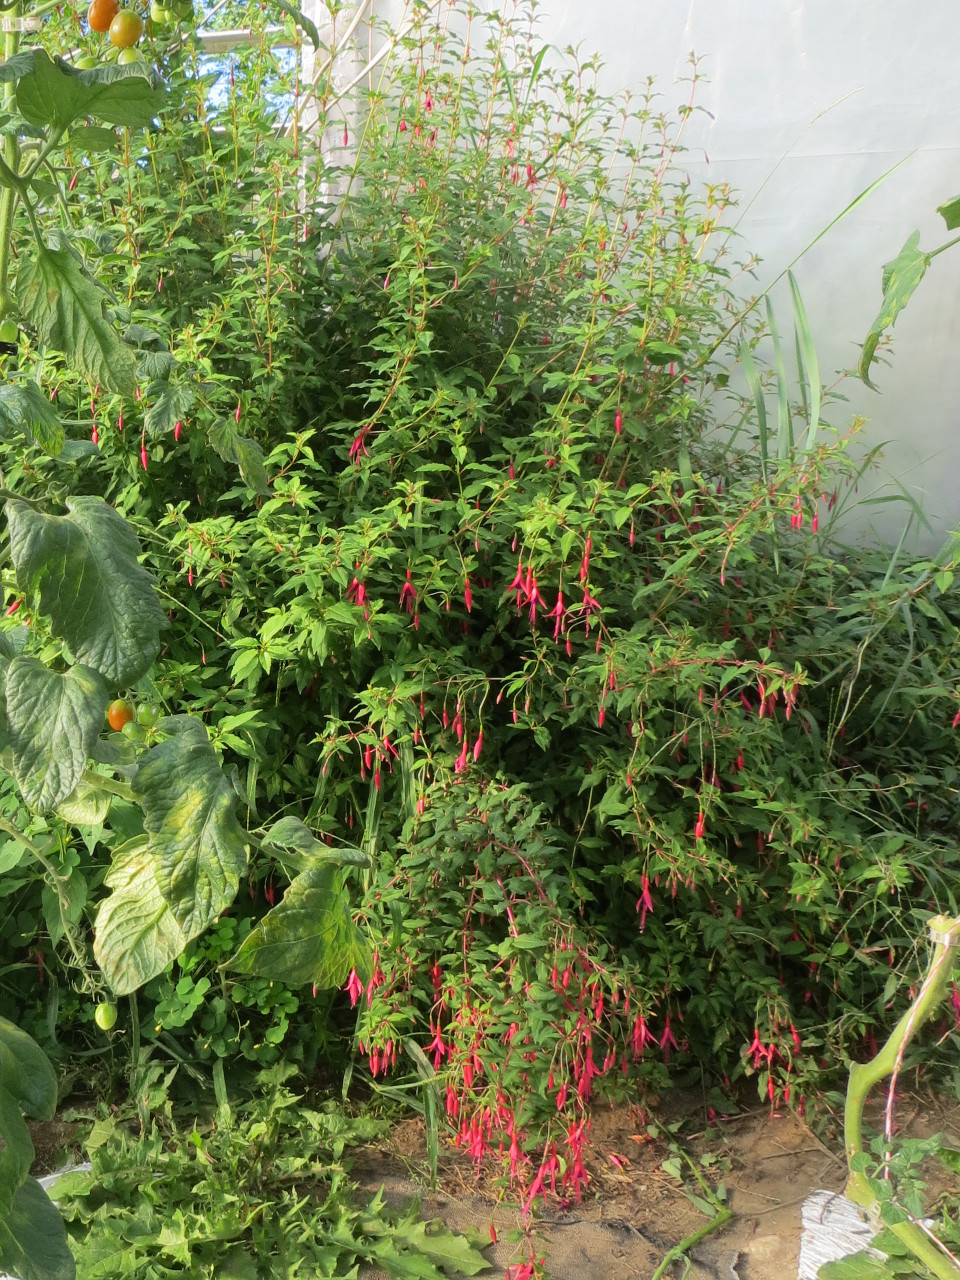 A waist-high plant: long thin arching stems with small leaves, bright magenta flowers dangle from some branches. It's inside a greenhouse, just against the end wall: you can see the open fins of the air vent in the top left corner. A cherry tomato vine hangs along the left edge of the photo